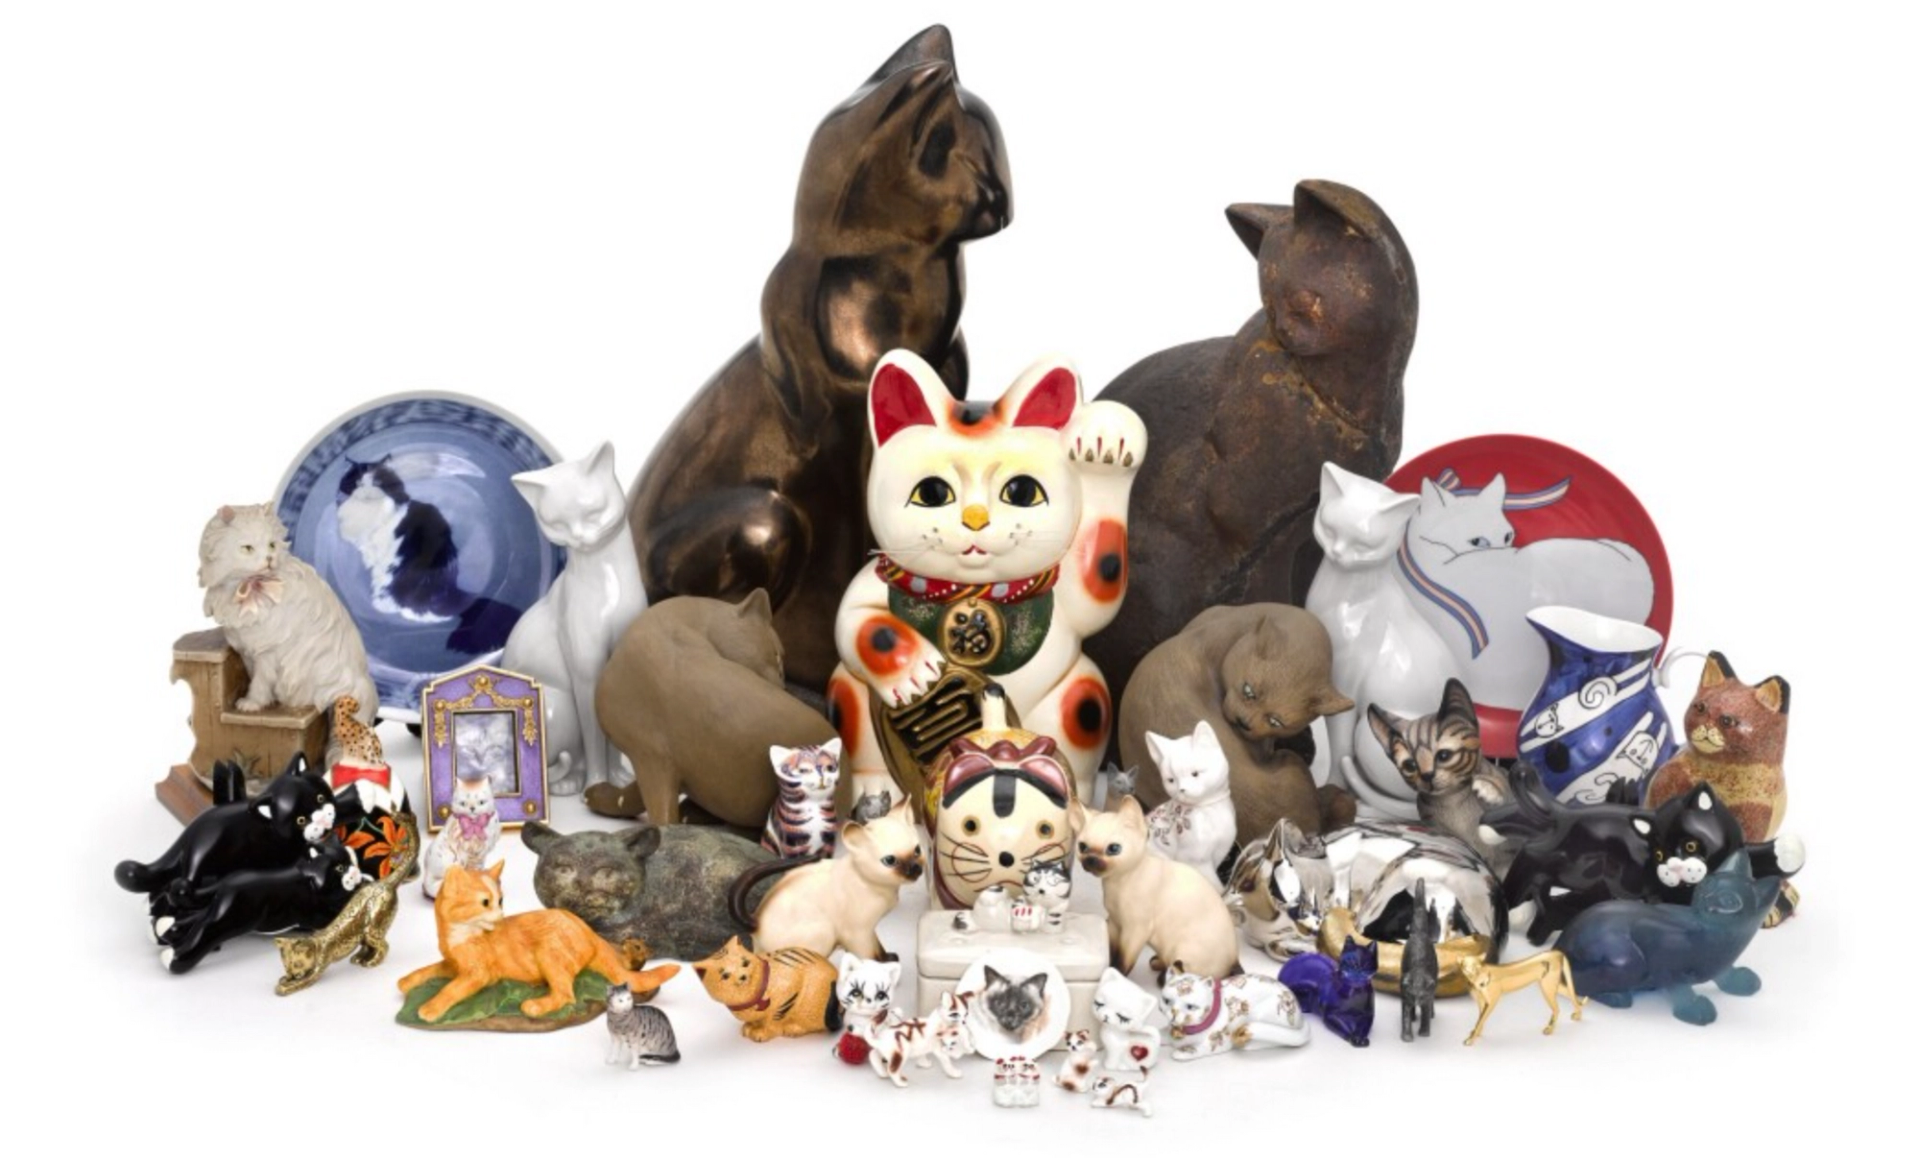 Twenty-nine figures of cats in a whimsical variety of decorative styles.